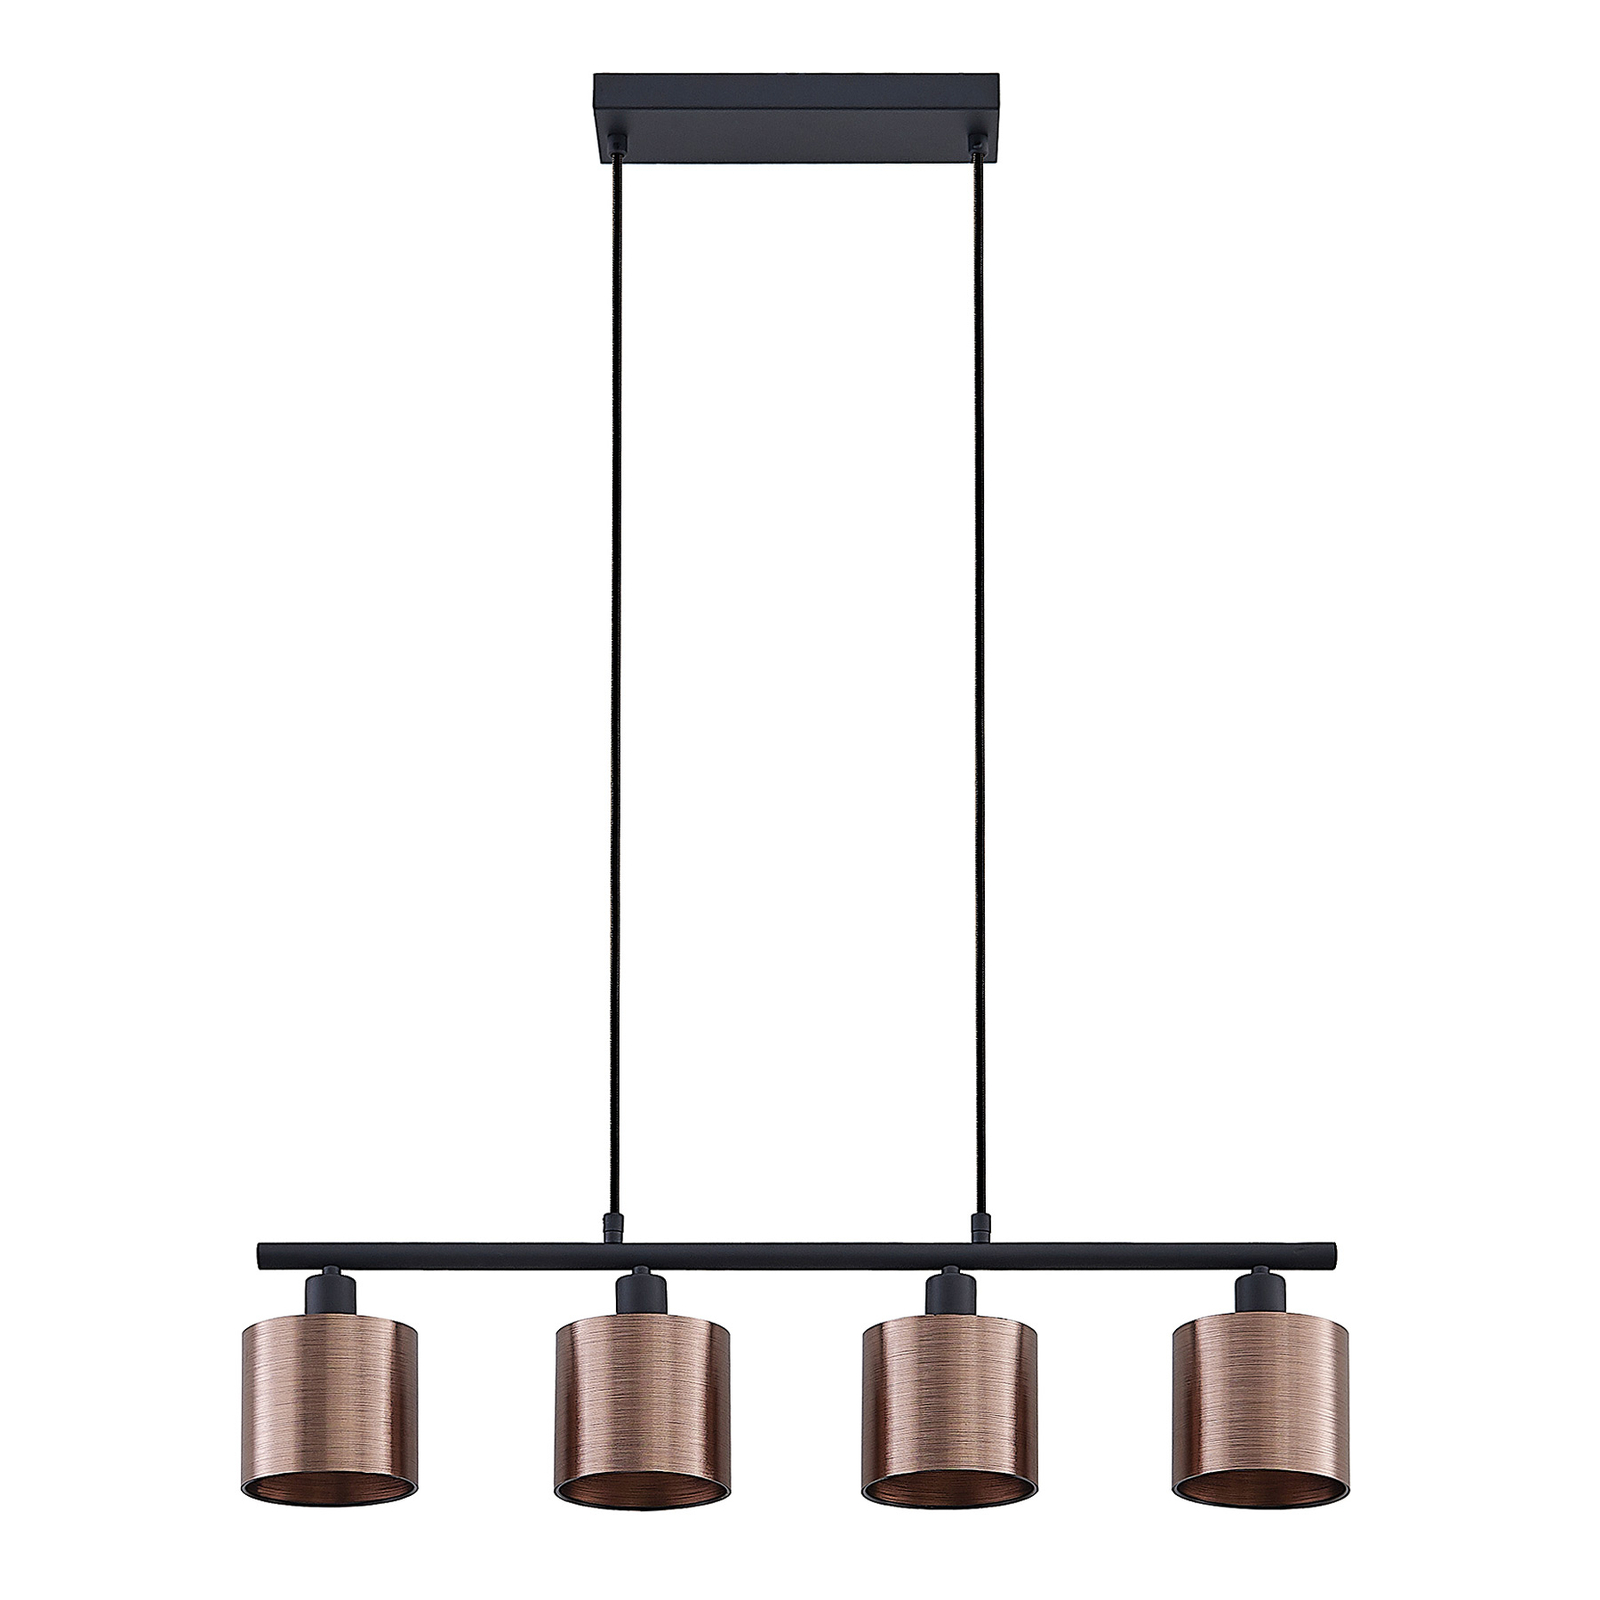 Lindby Joudy hanglamp, 4-lamps, brons donker